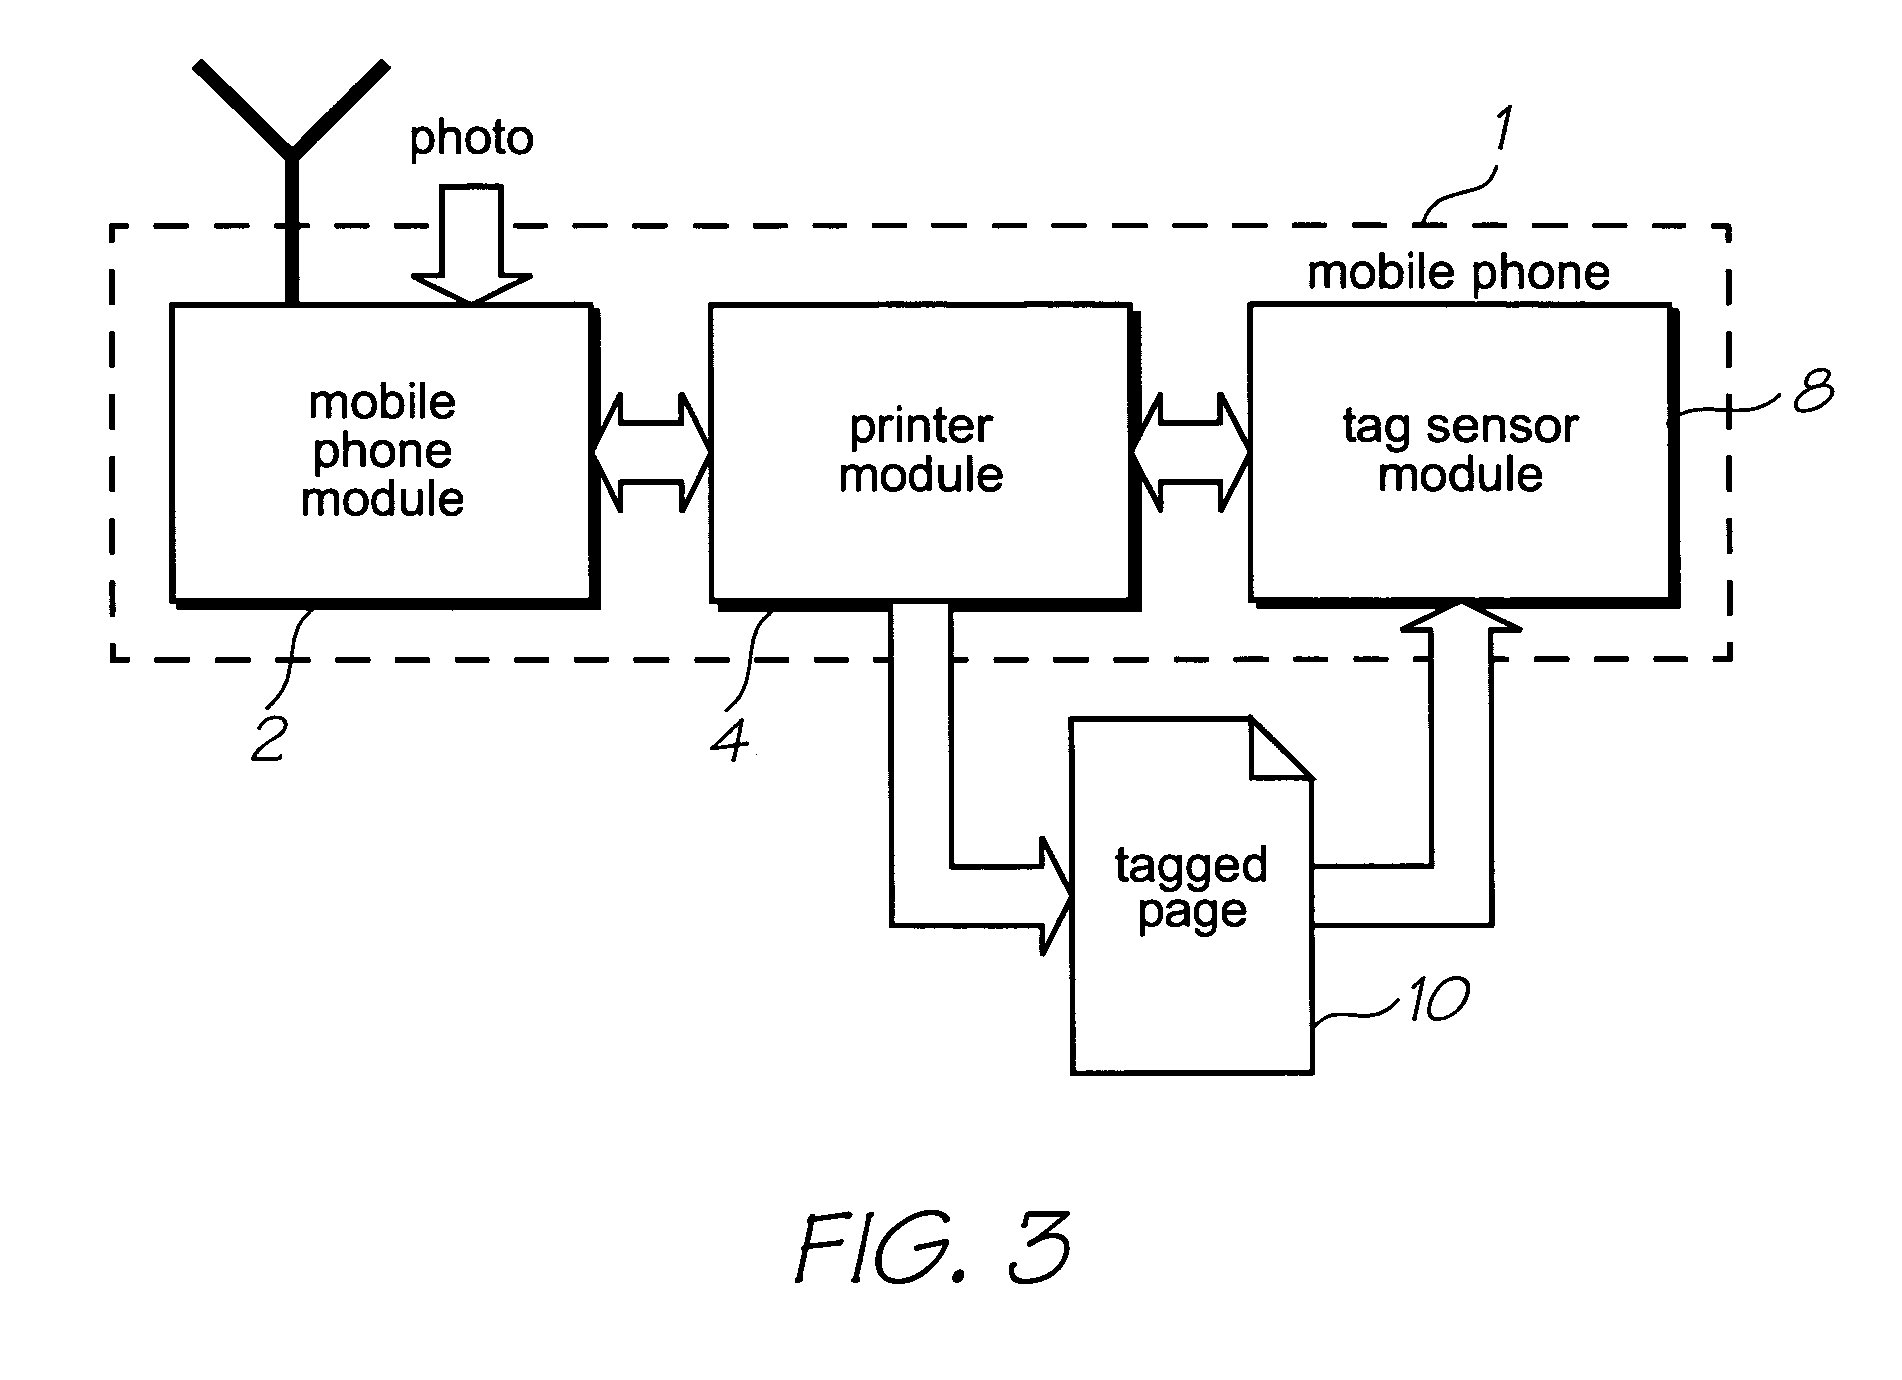 Mobile telecommunication device with a printhead and single media feed roller